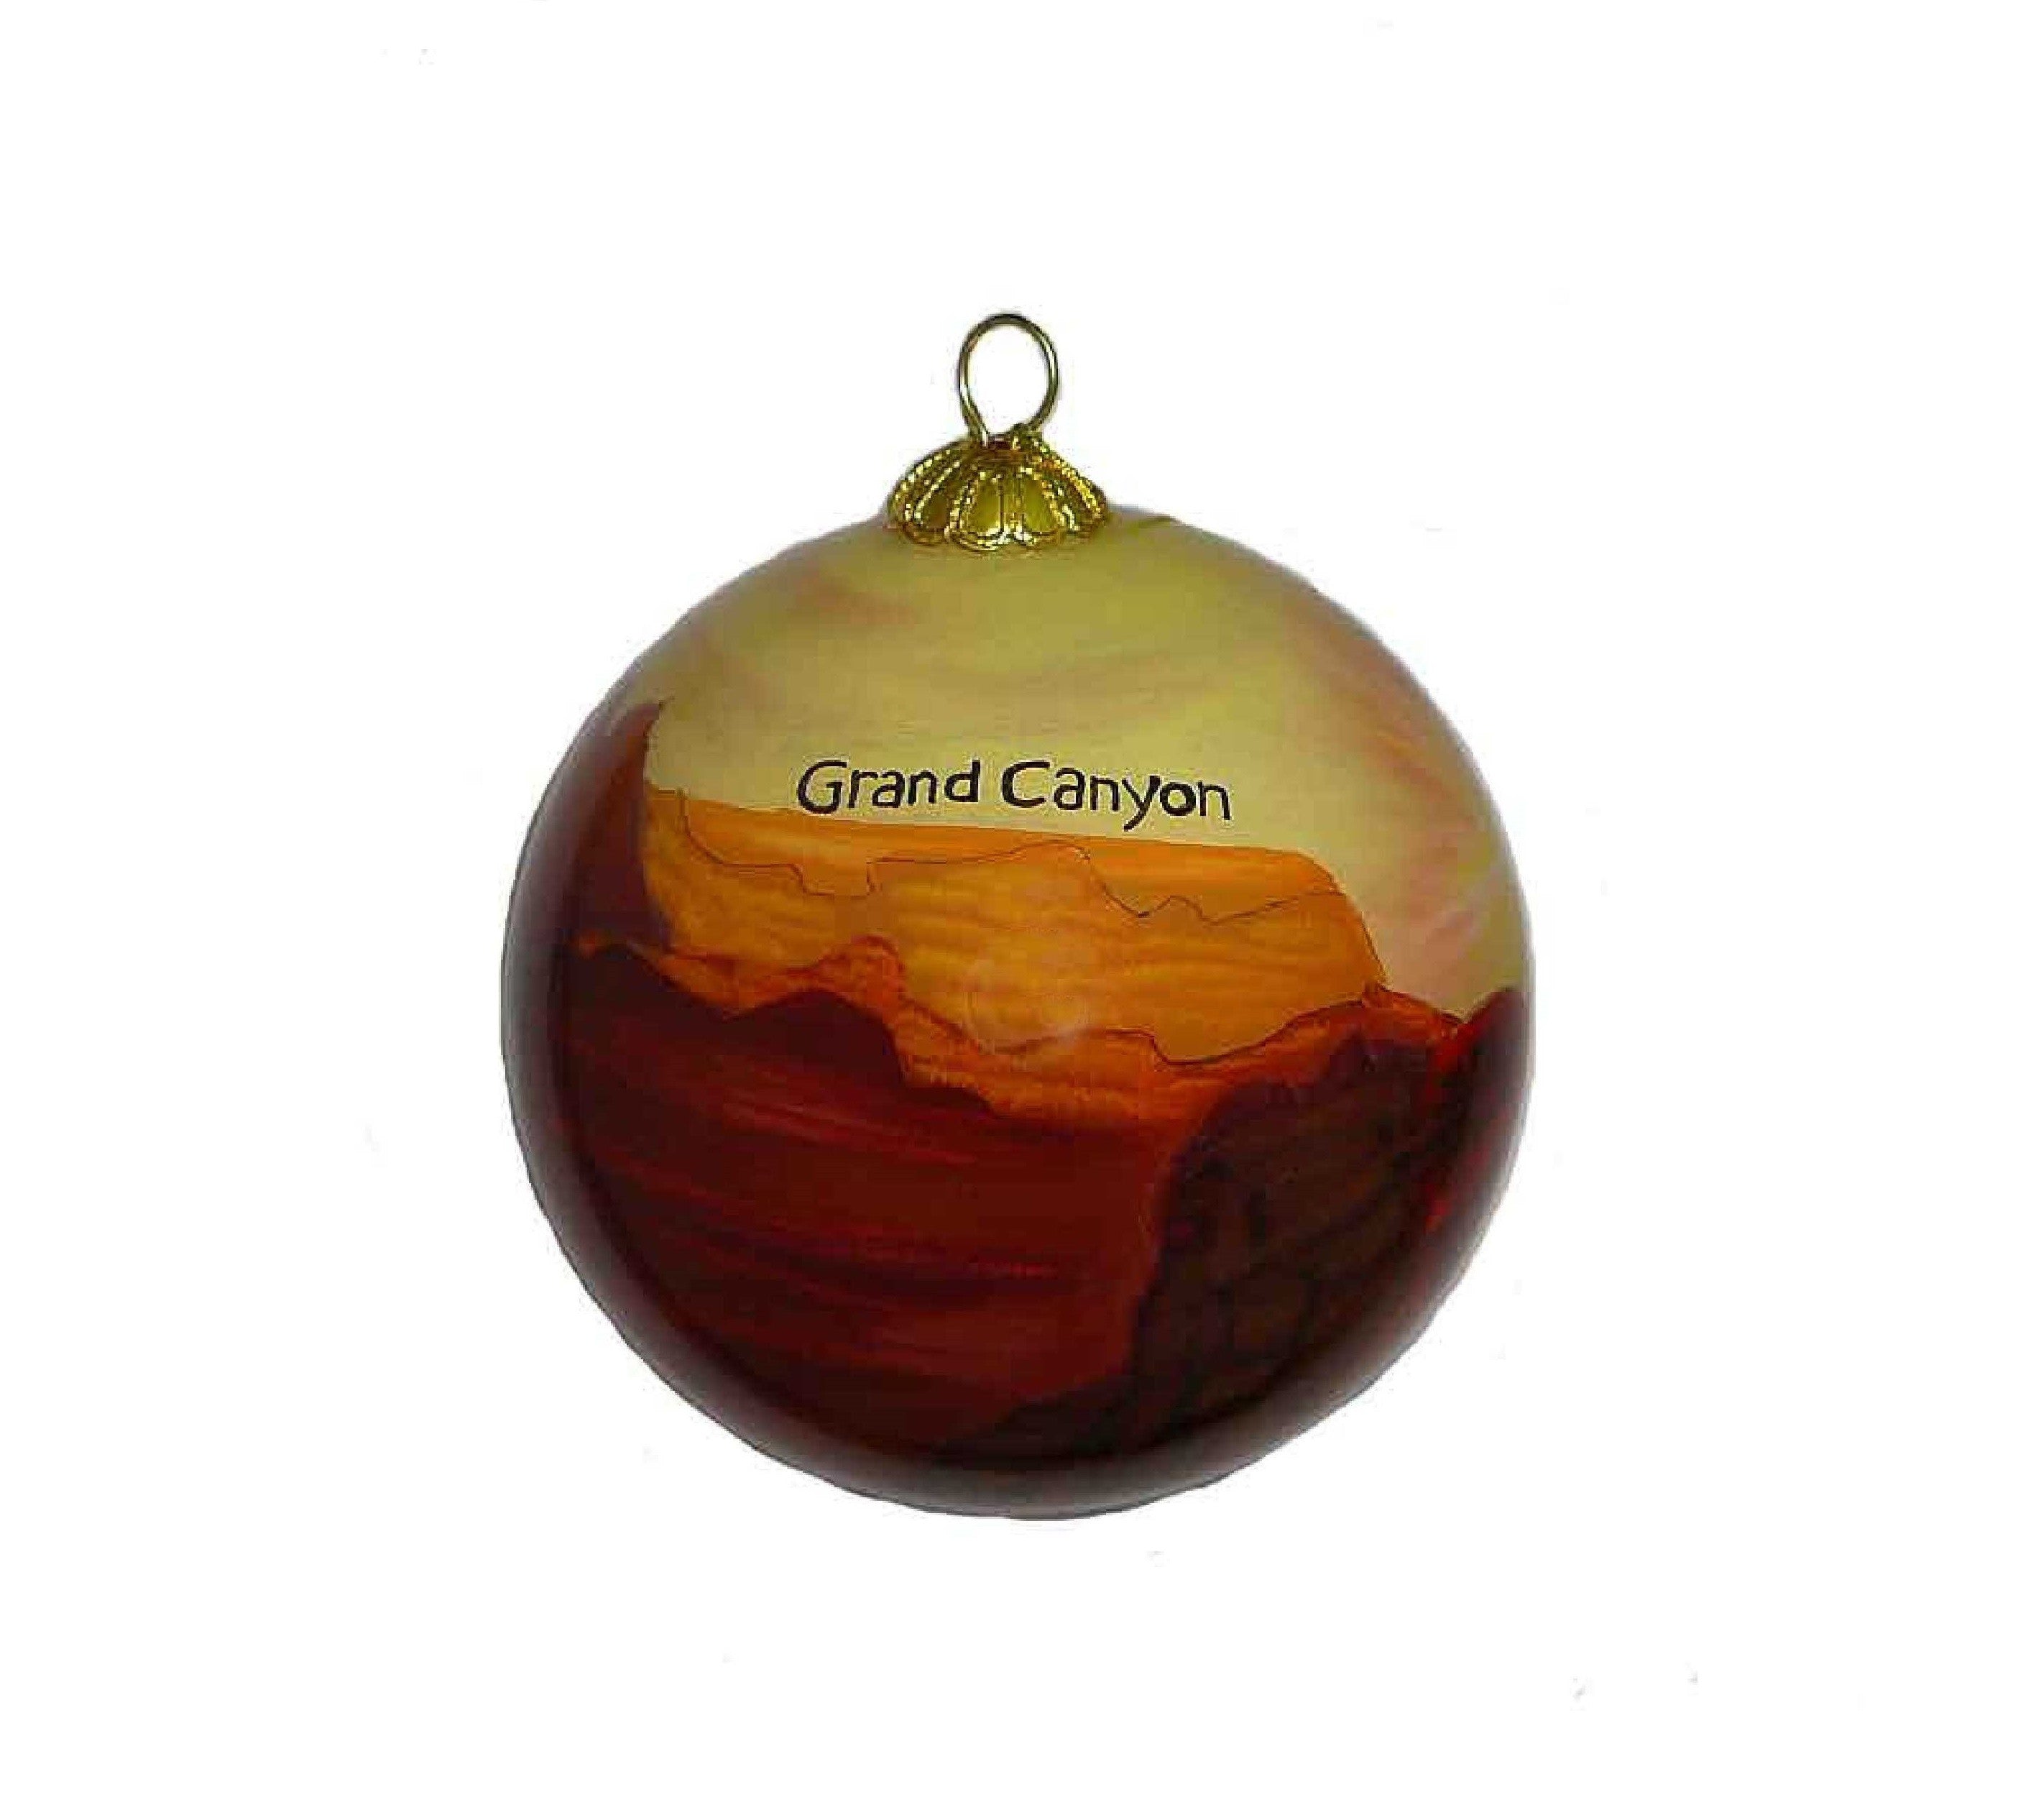 Grand Canyon Hand Painted Ornament